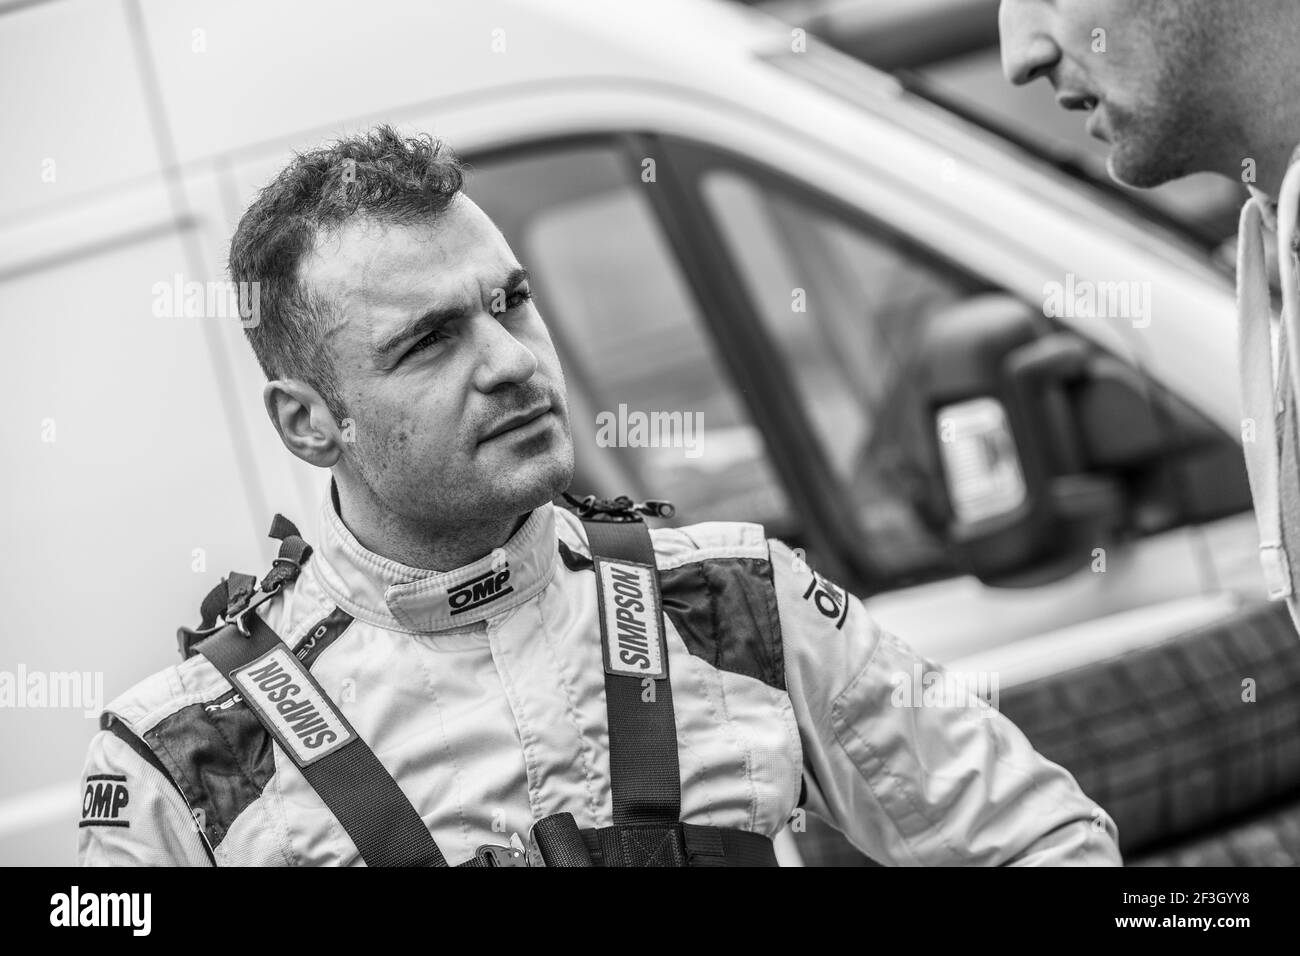 09 GILBERT Quentin (fra), SALMON Valentin (fra), Skoda Fabia, portrait during the 2018 French rally championship, rallye du Touquet from March 15 to 17 at Le Touquet, France - Photo Gregory Lenormand / DPPI Stock Photo